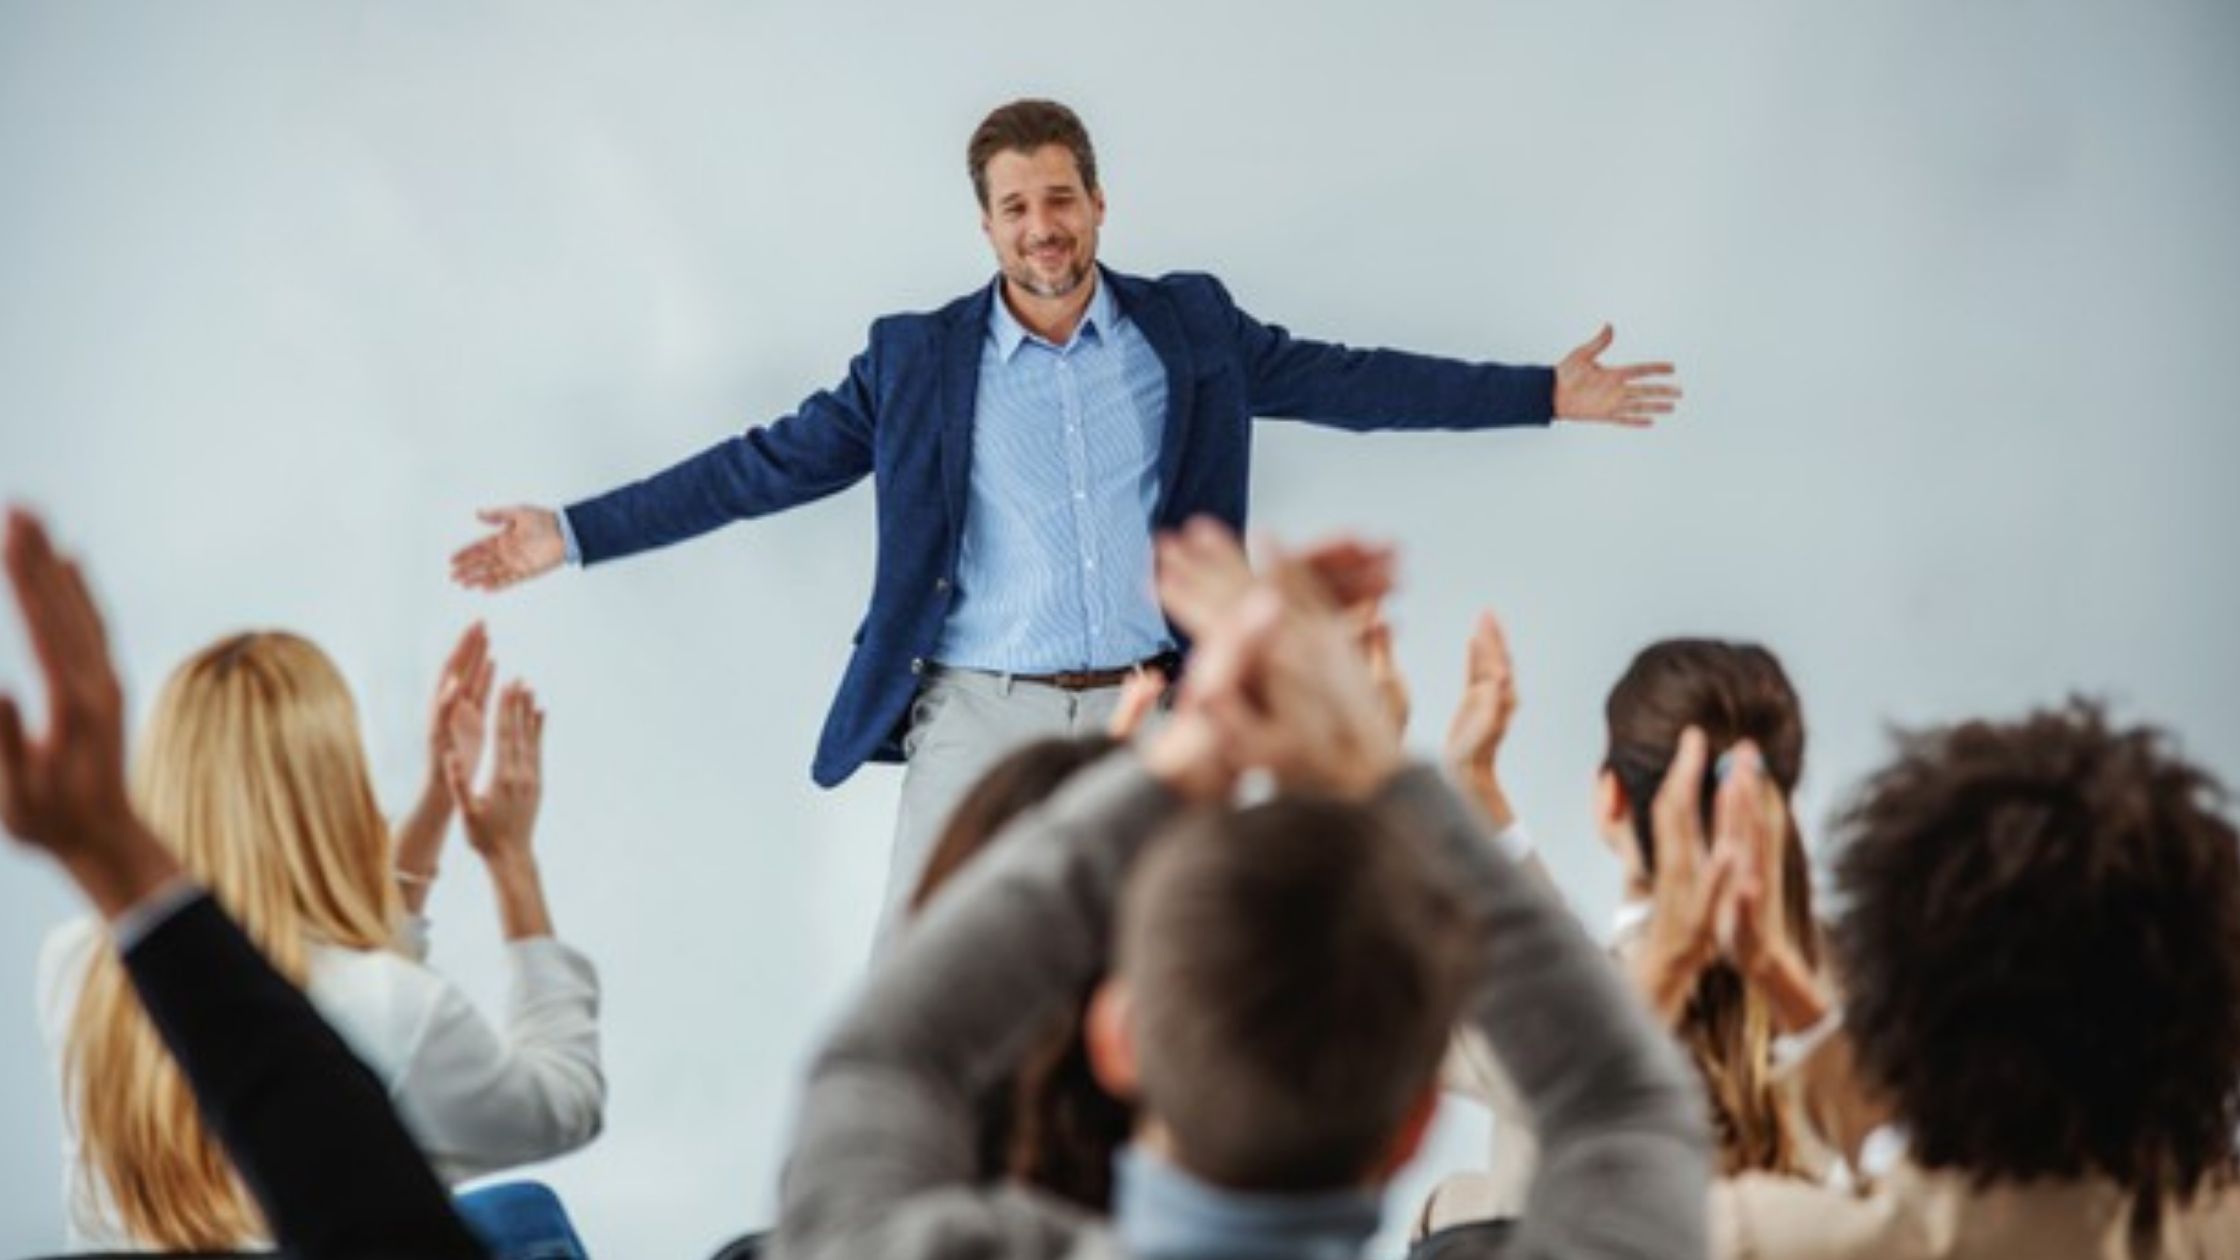 How to get public speaking experience in any economy